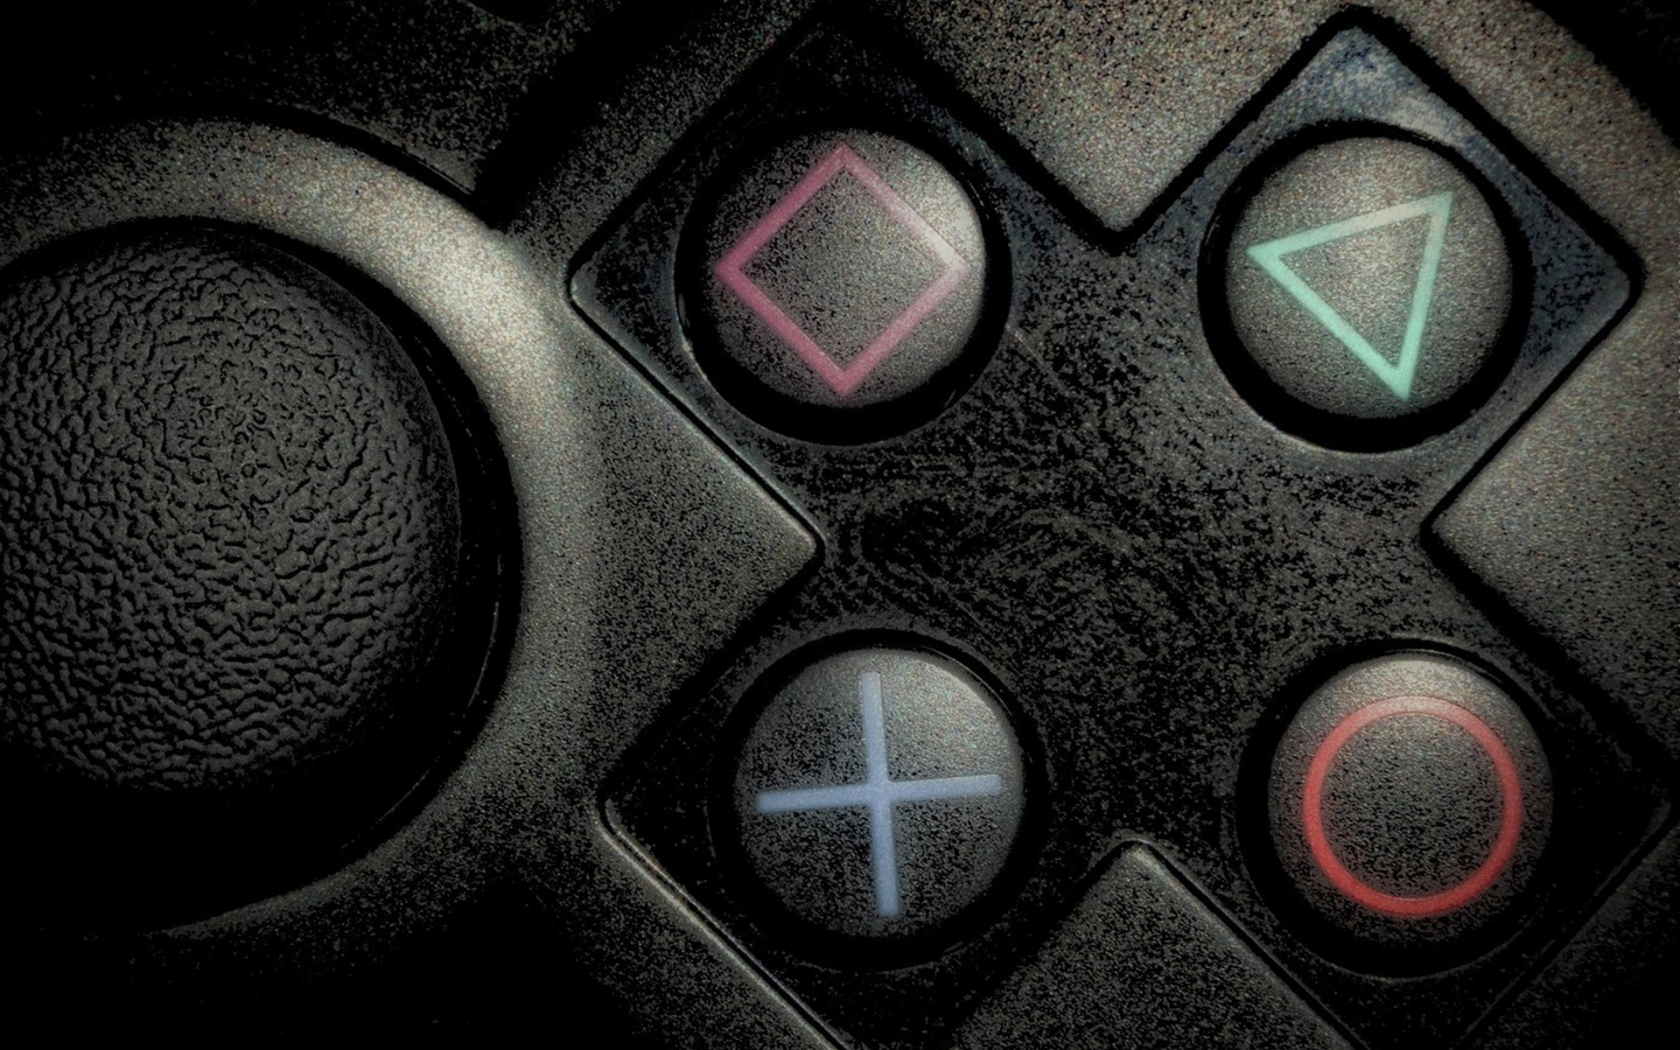 Playstation Buttons for 1680 x 1050 widescreen resolution